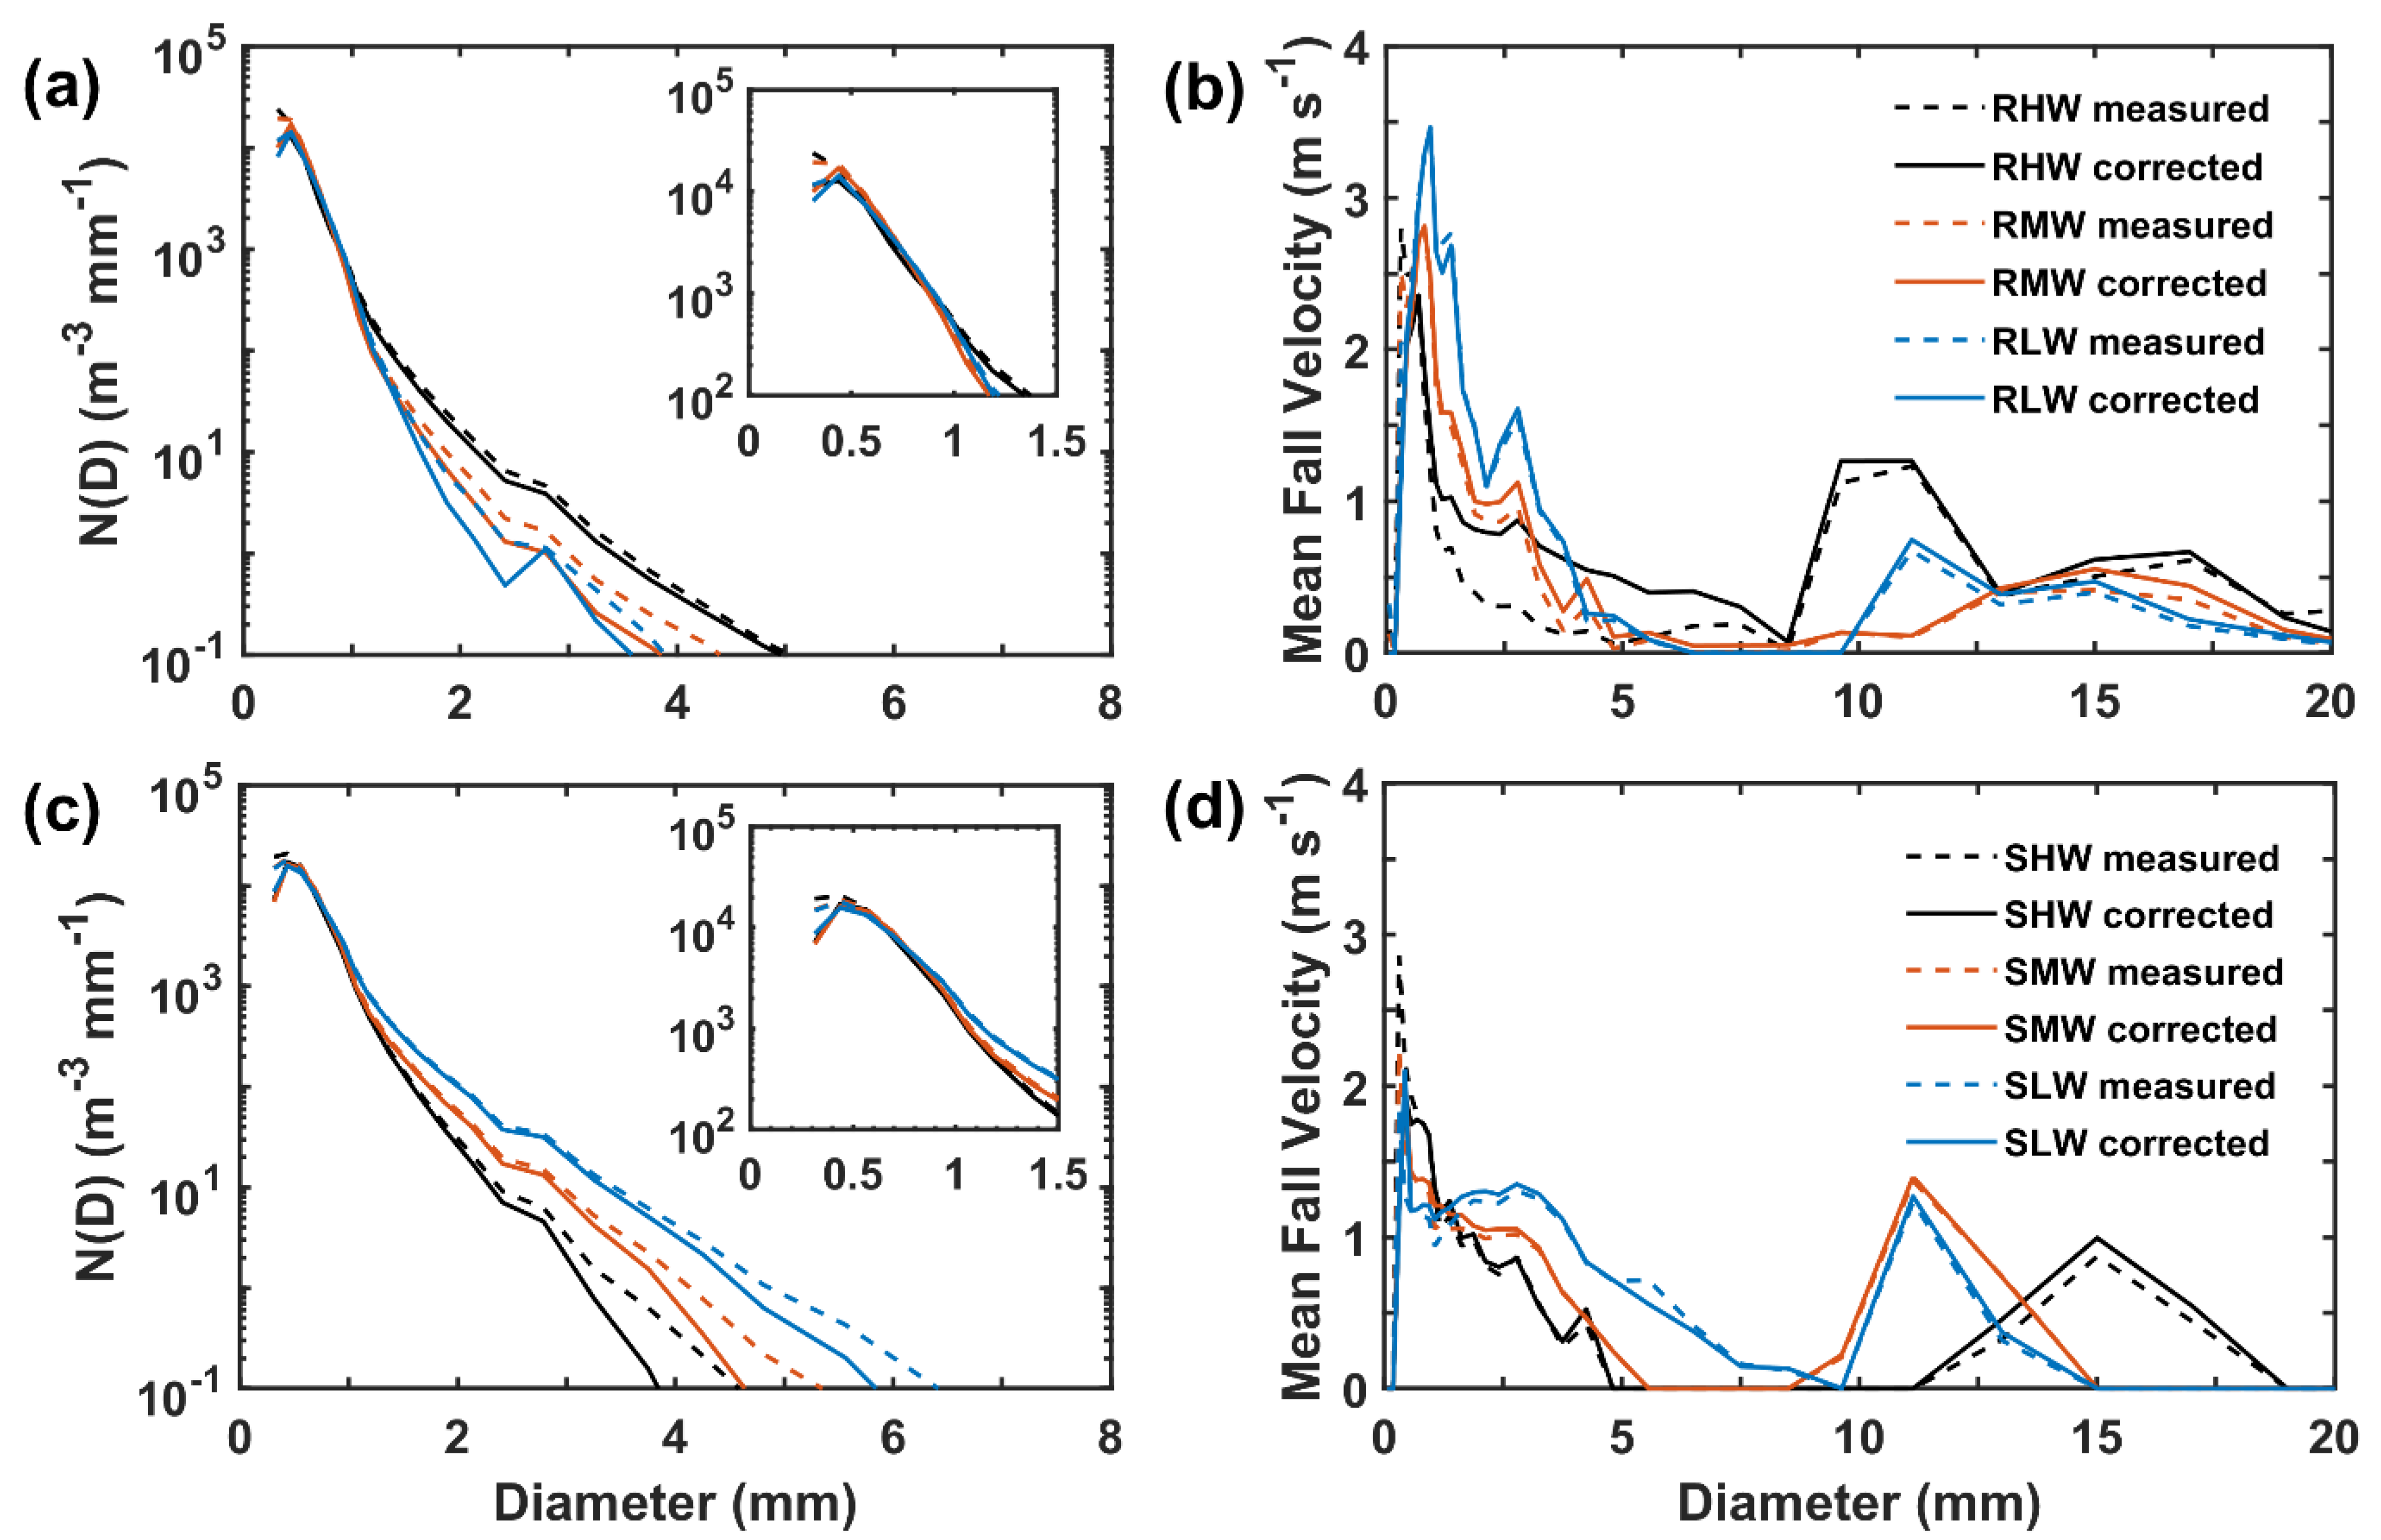 Water | Free Full-Text | Corrections of Precipitation Particle Size  Distribution Measured by a Parsivel OTT2 Disdrometer under Windy Conditions  in the Antisana Massif, Ecuador | HTML